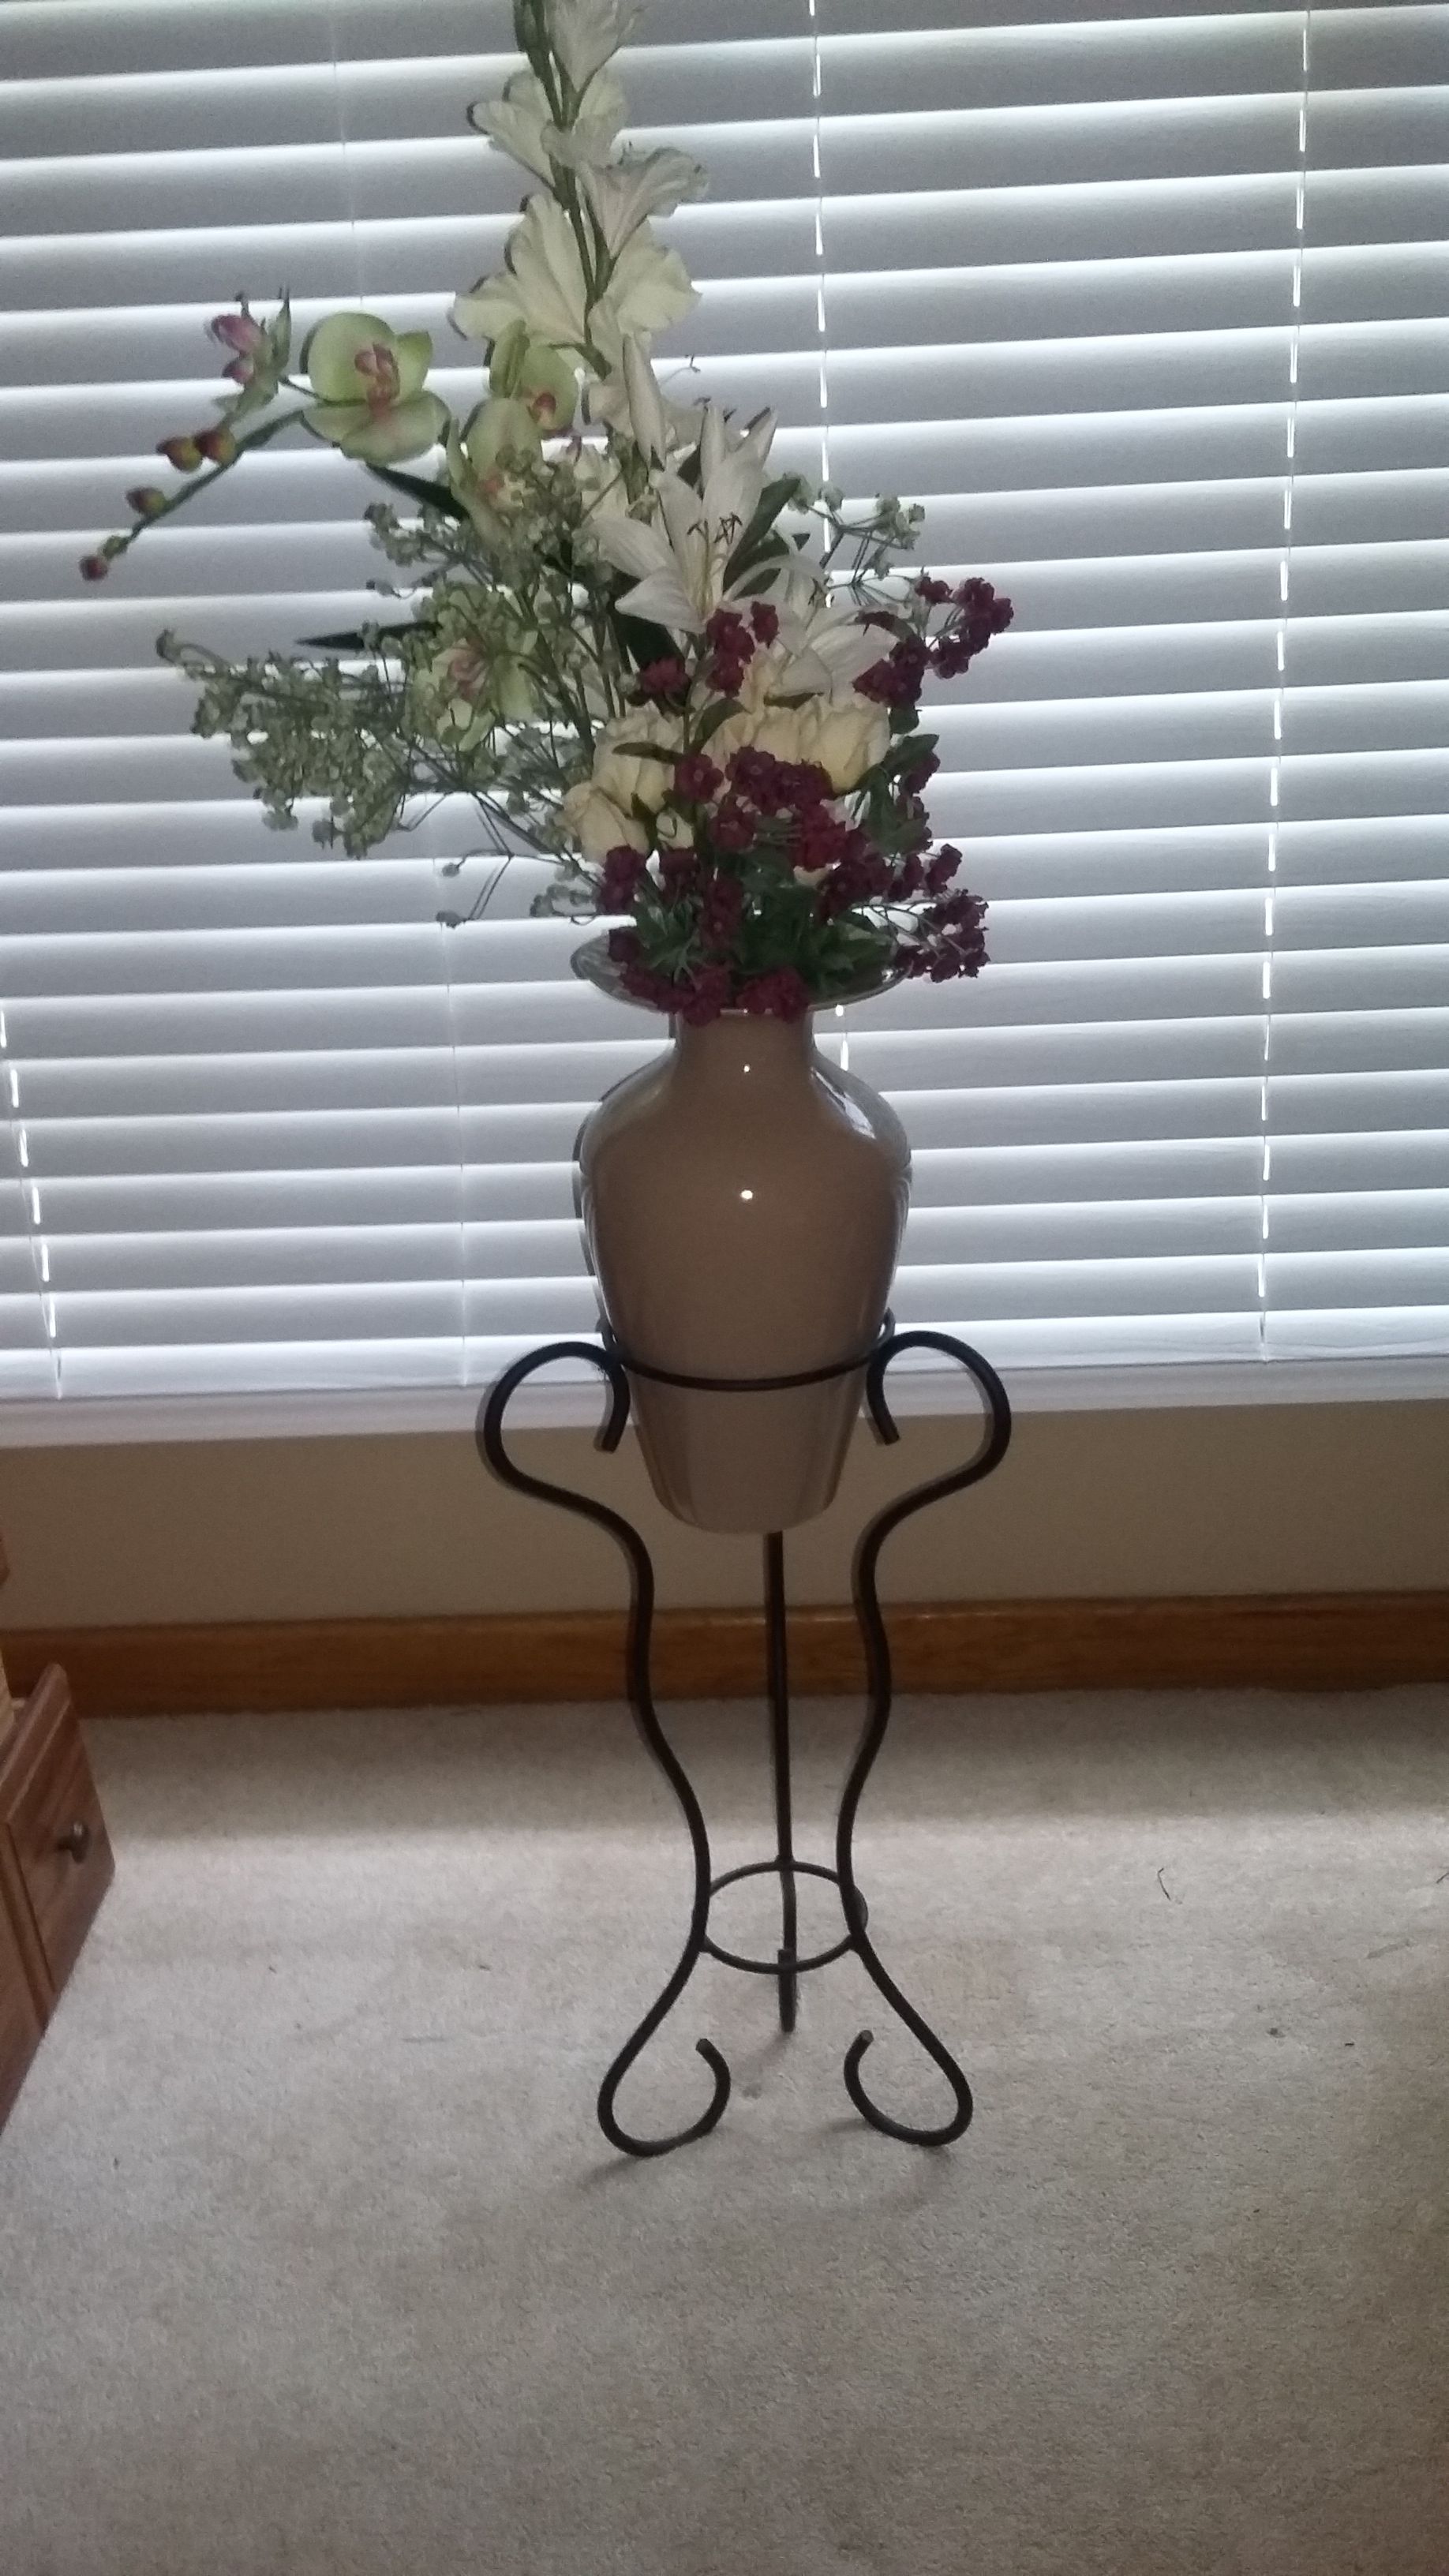 Vase with stand & flowers